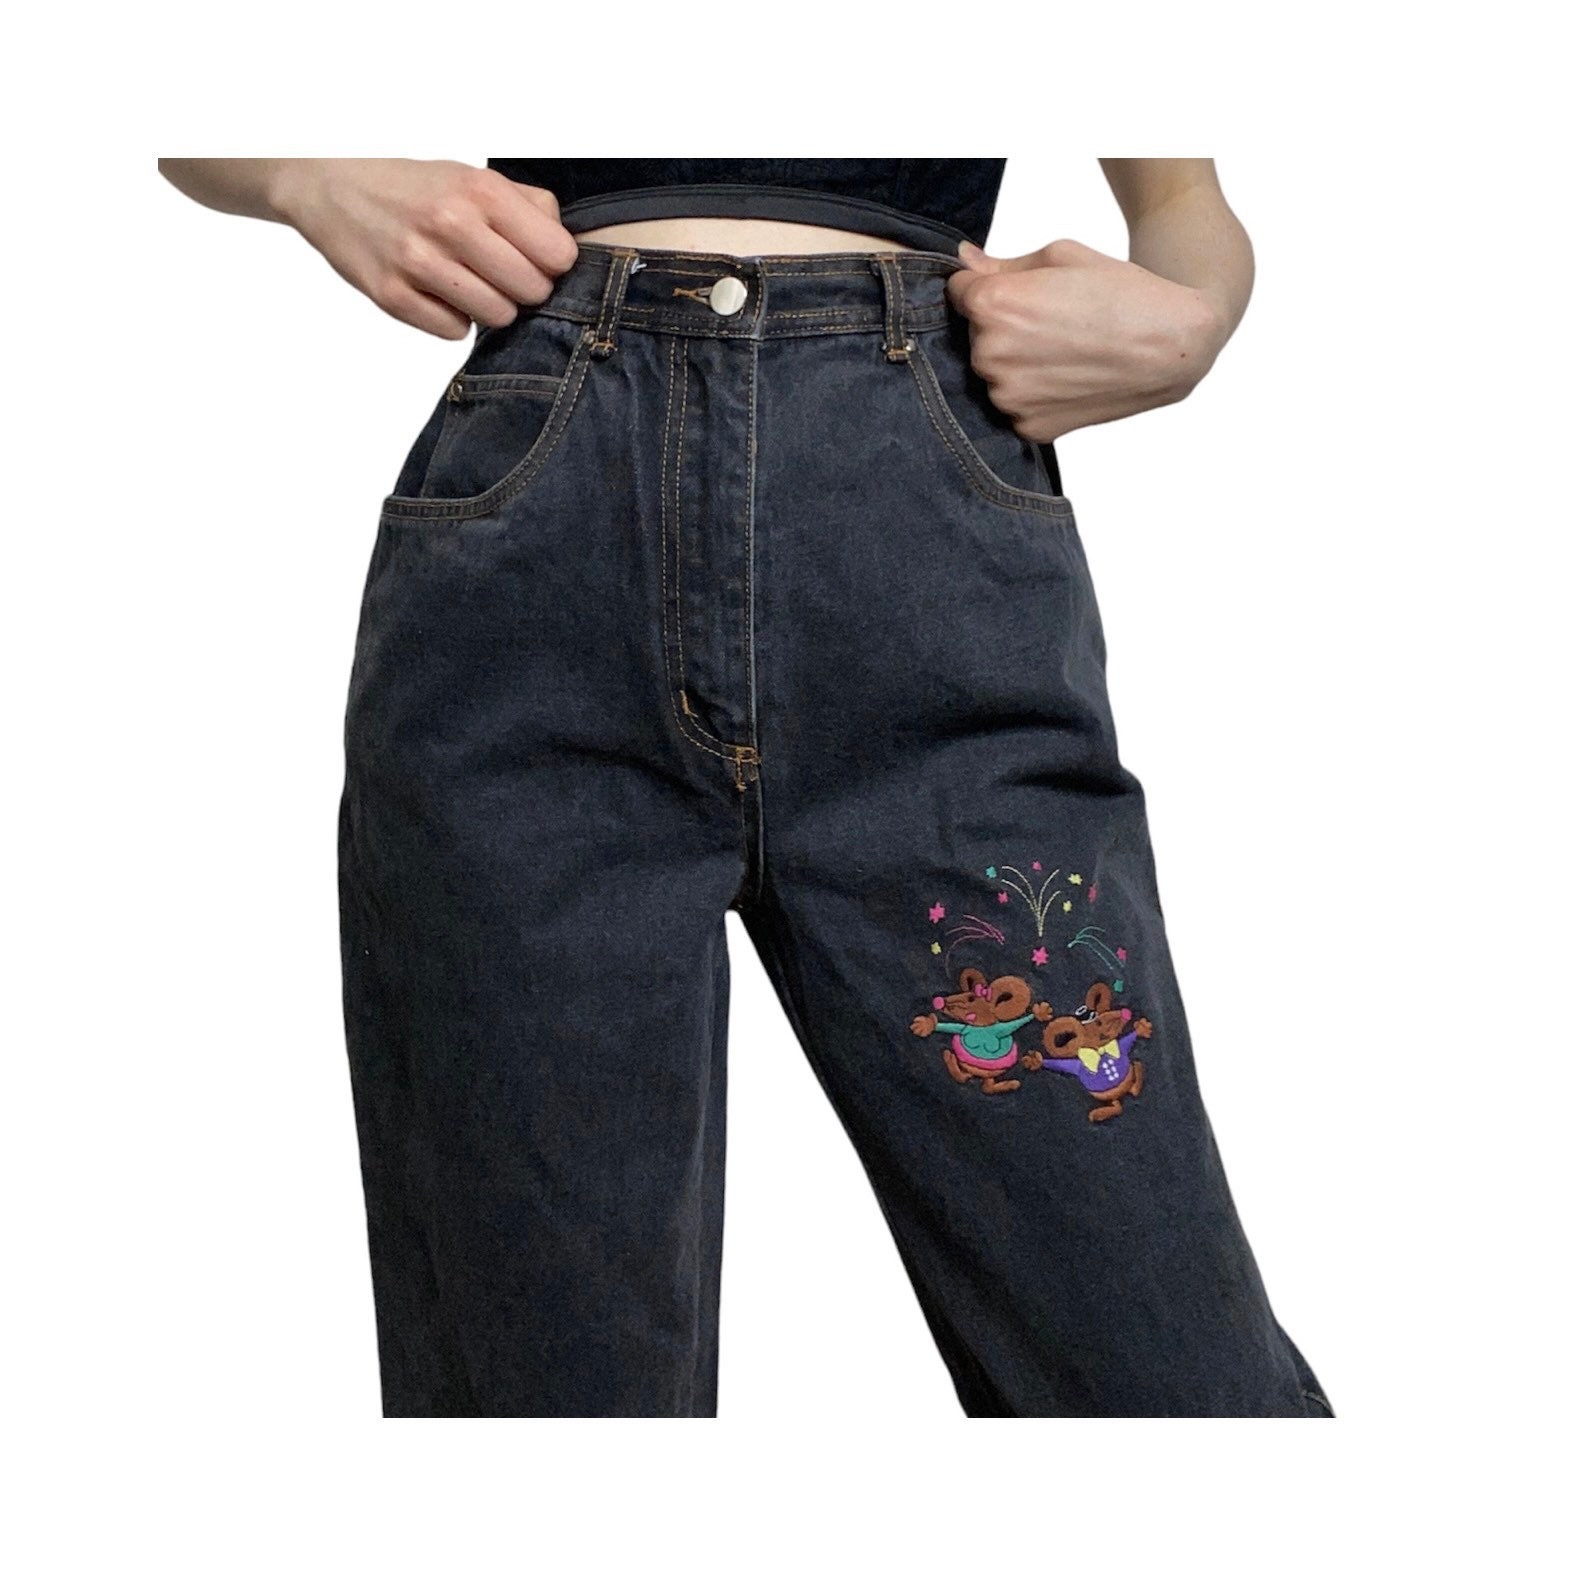 Mom Jeans Embroidery - Etsy